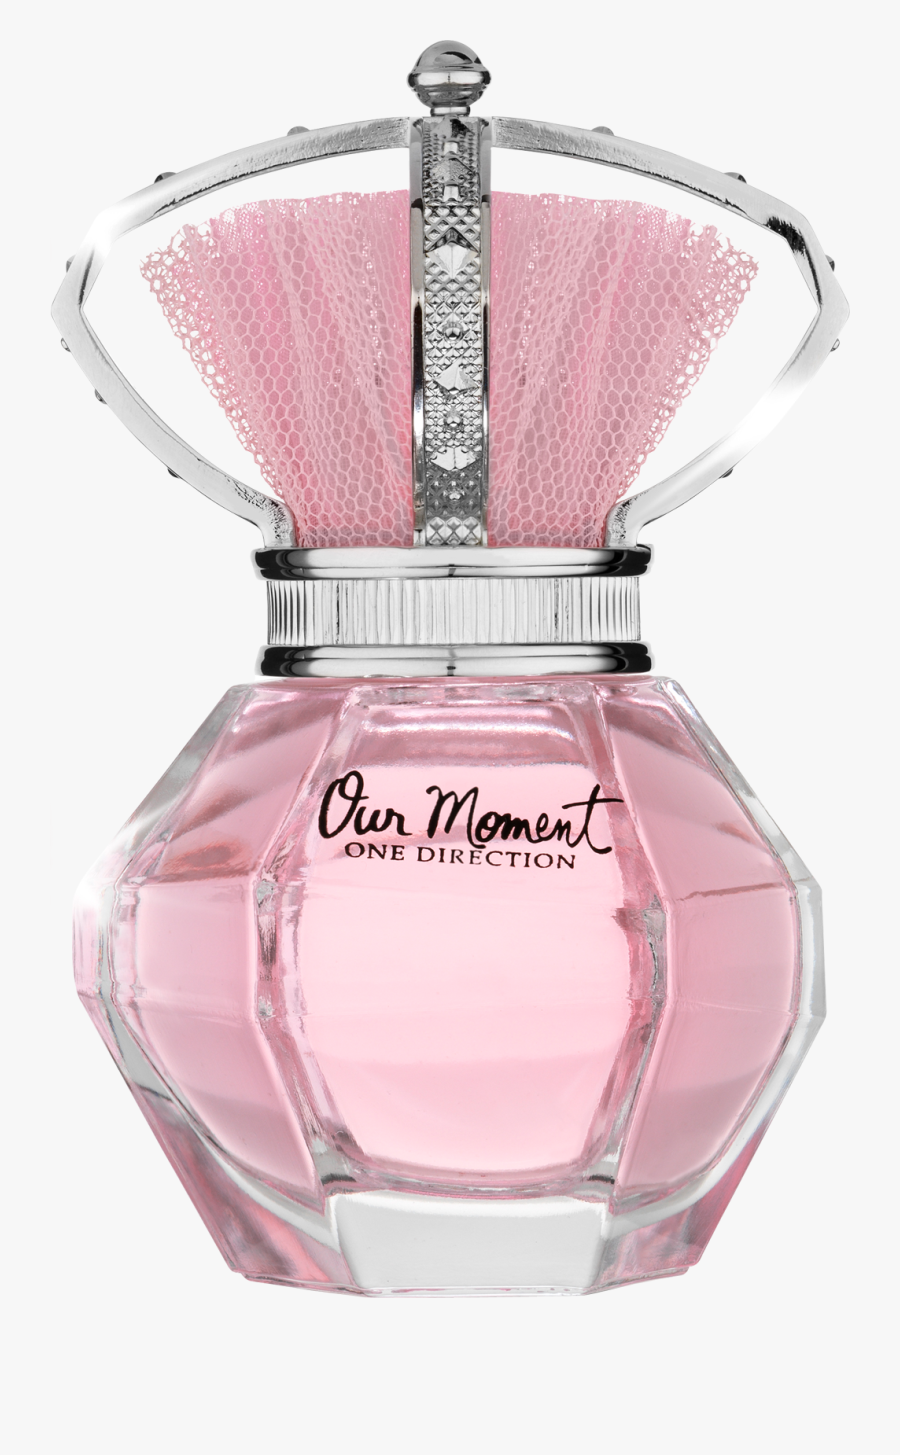 Perfume Png Image - One Direction Our Moment Edp 100ml, Transparent Clipart